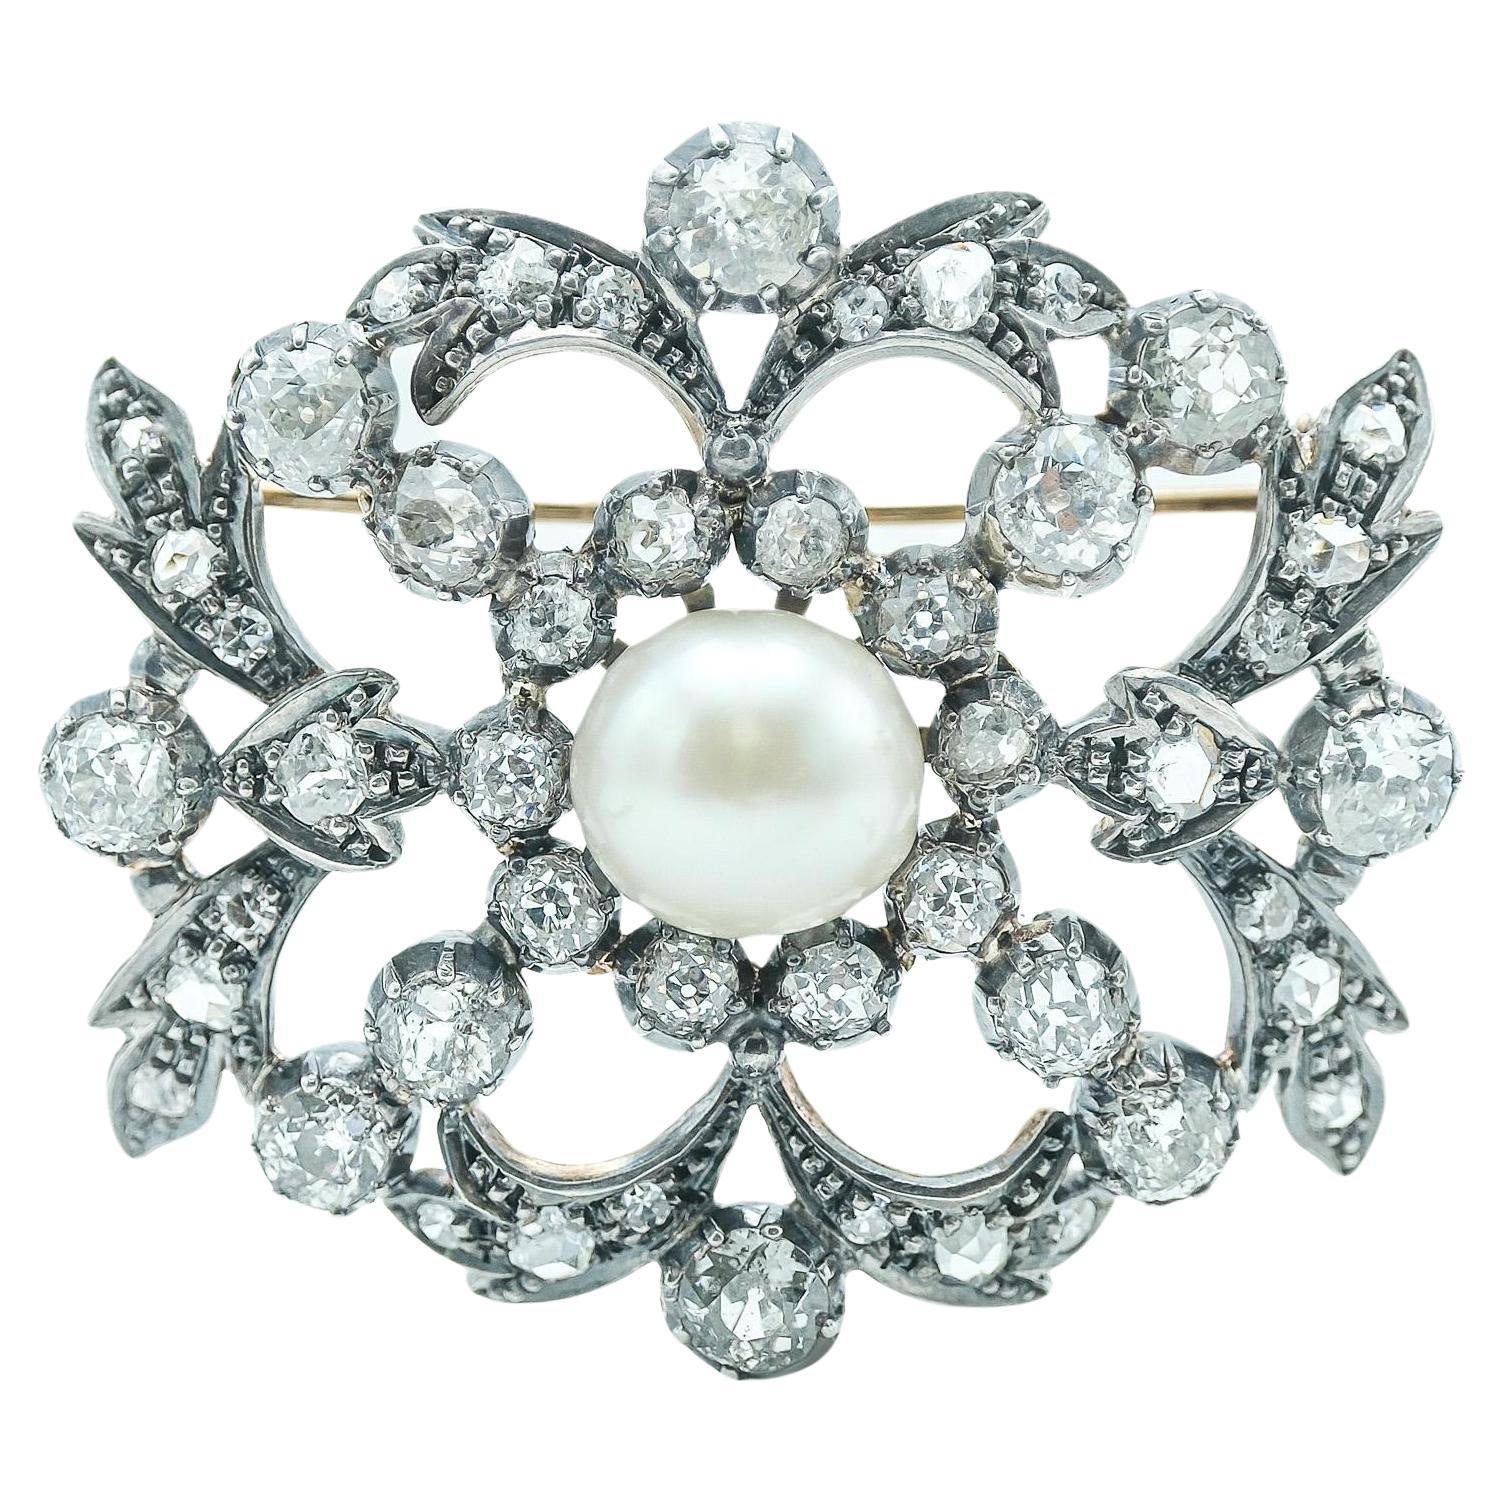 Edwardian 10 Karat White Gold, Silver Topped Diamond and Pearl Brooch For Sale